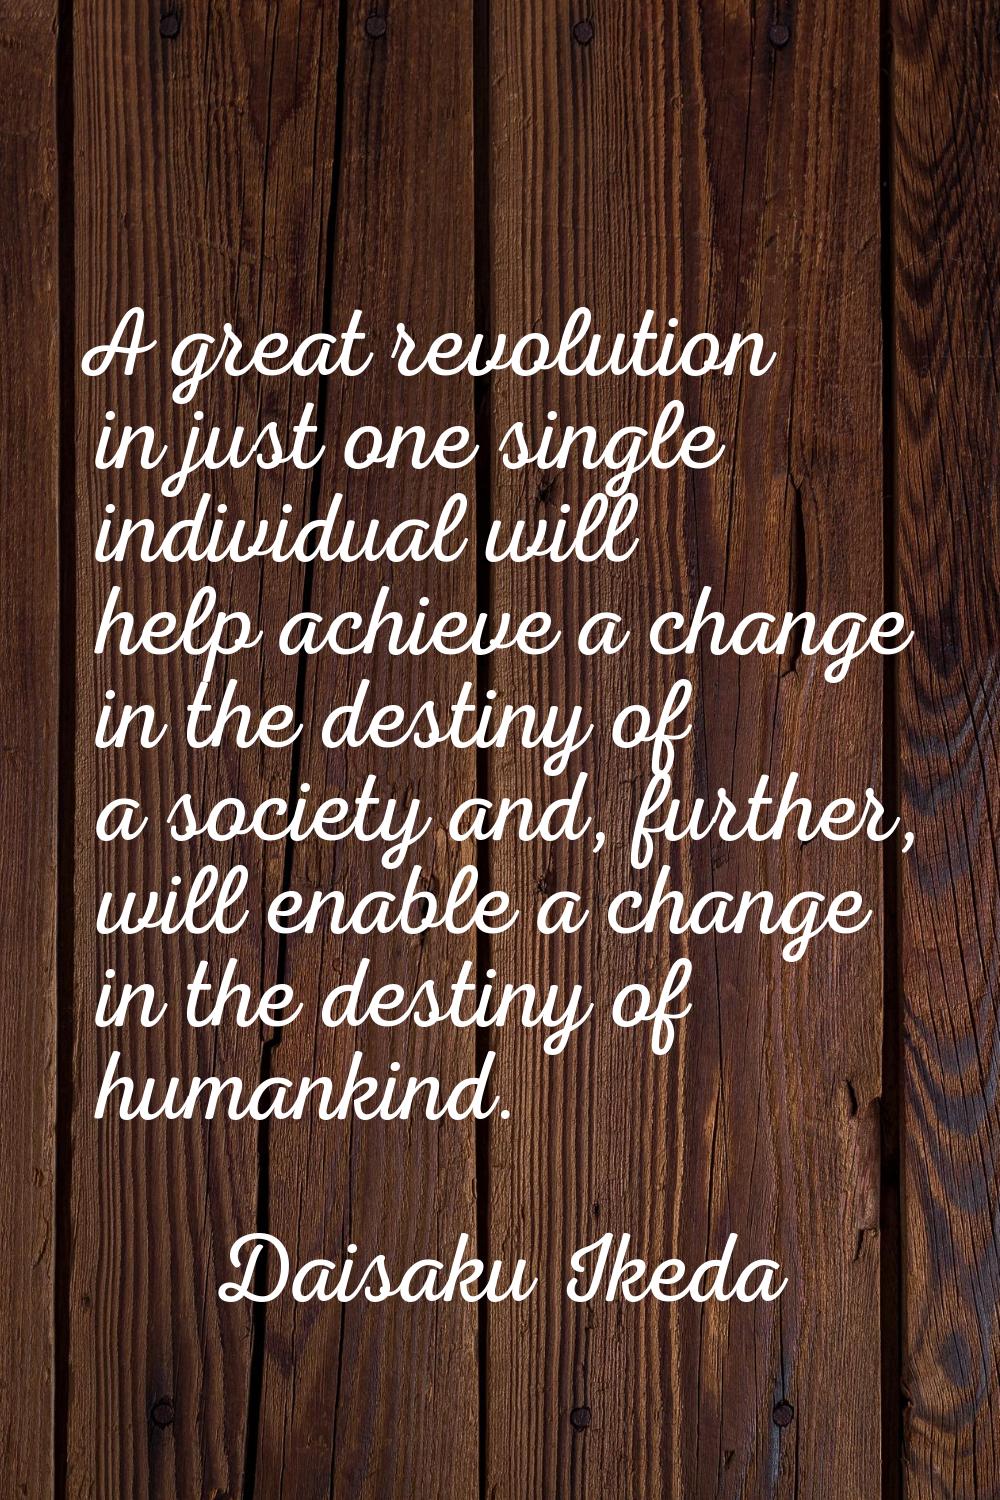 A great revolution in just one single individual will help achieve a change in the destiny of a soc